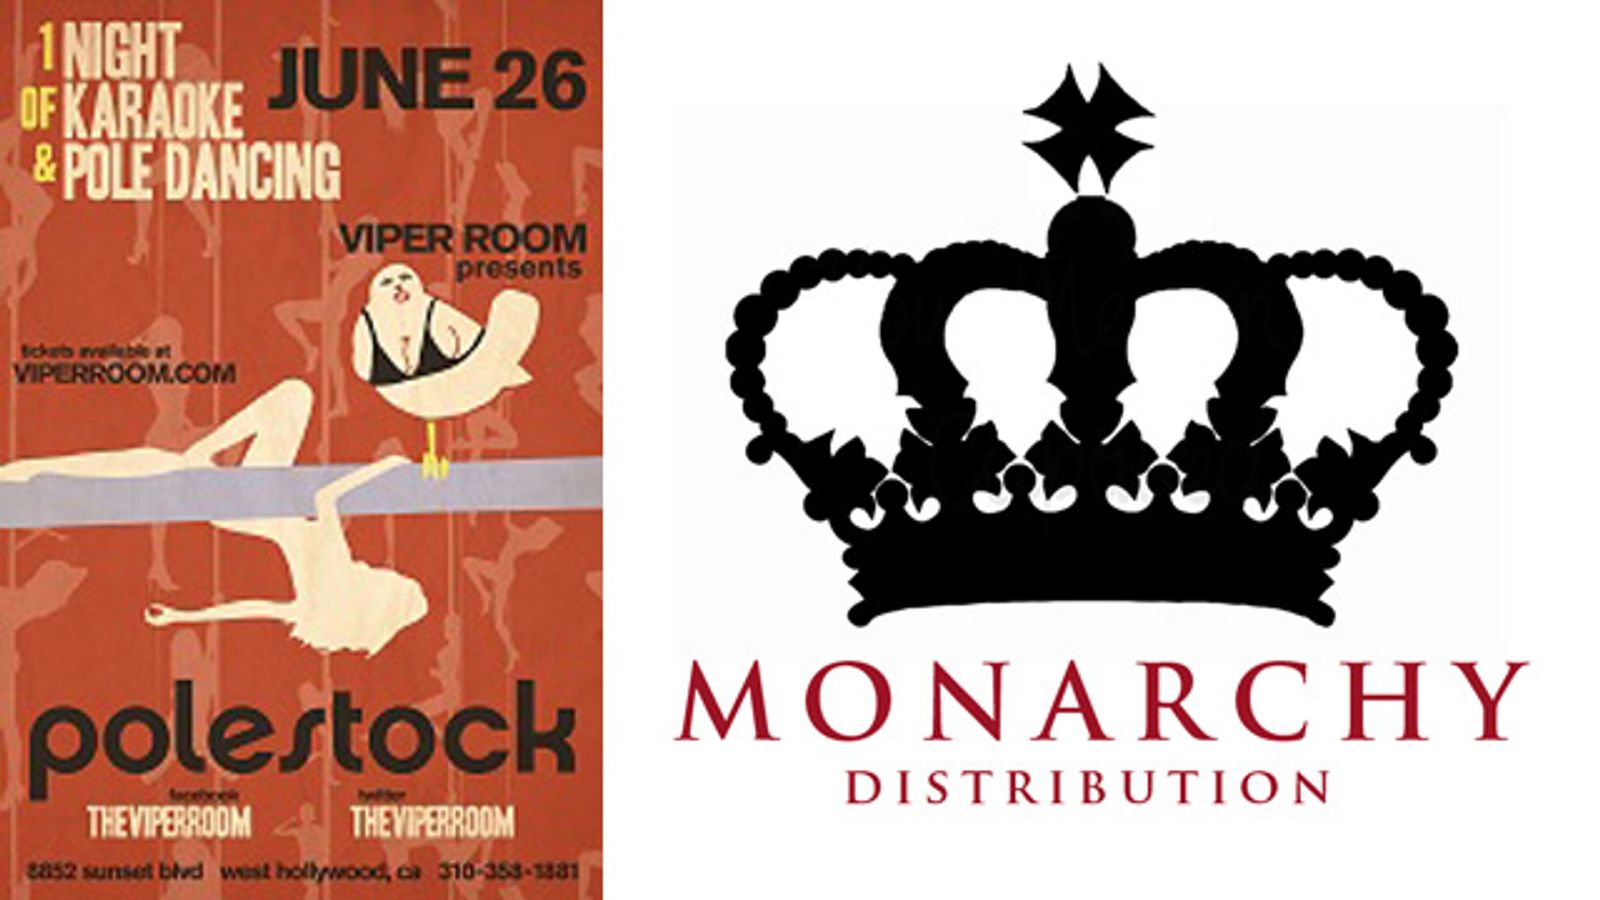 Monarchy Distribution and Viper Room Announce 3rd Polestock